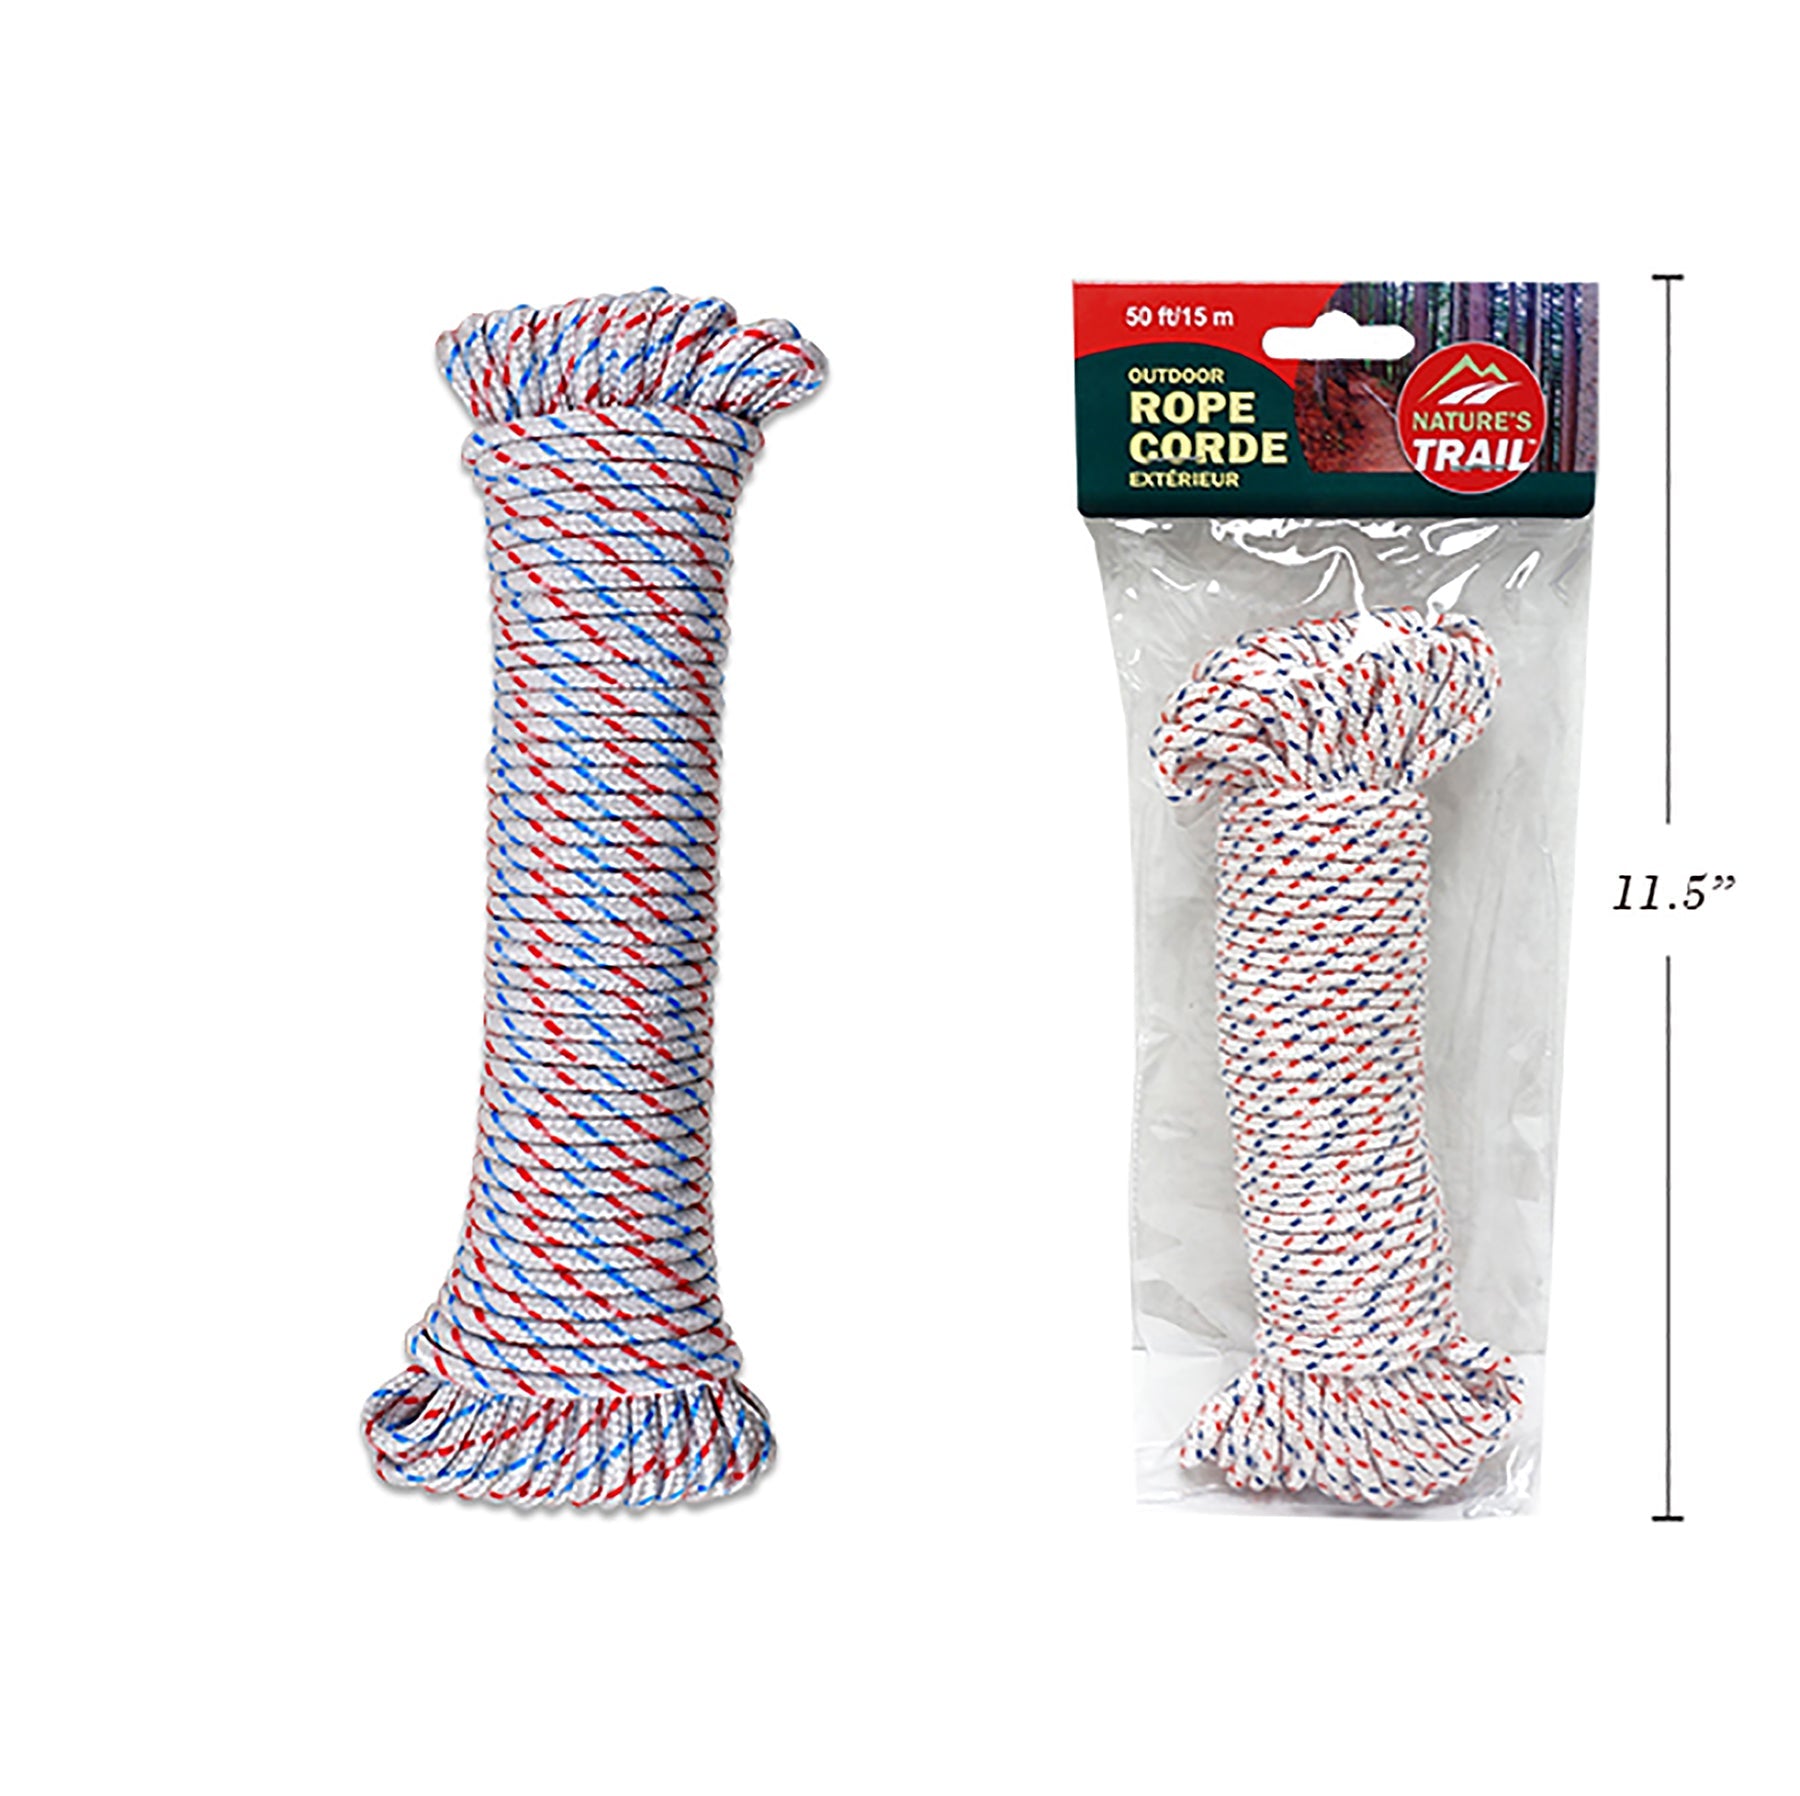 Nature's Trail Outdoor Rope 600in (50ft)